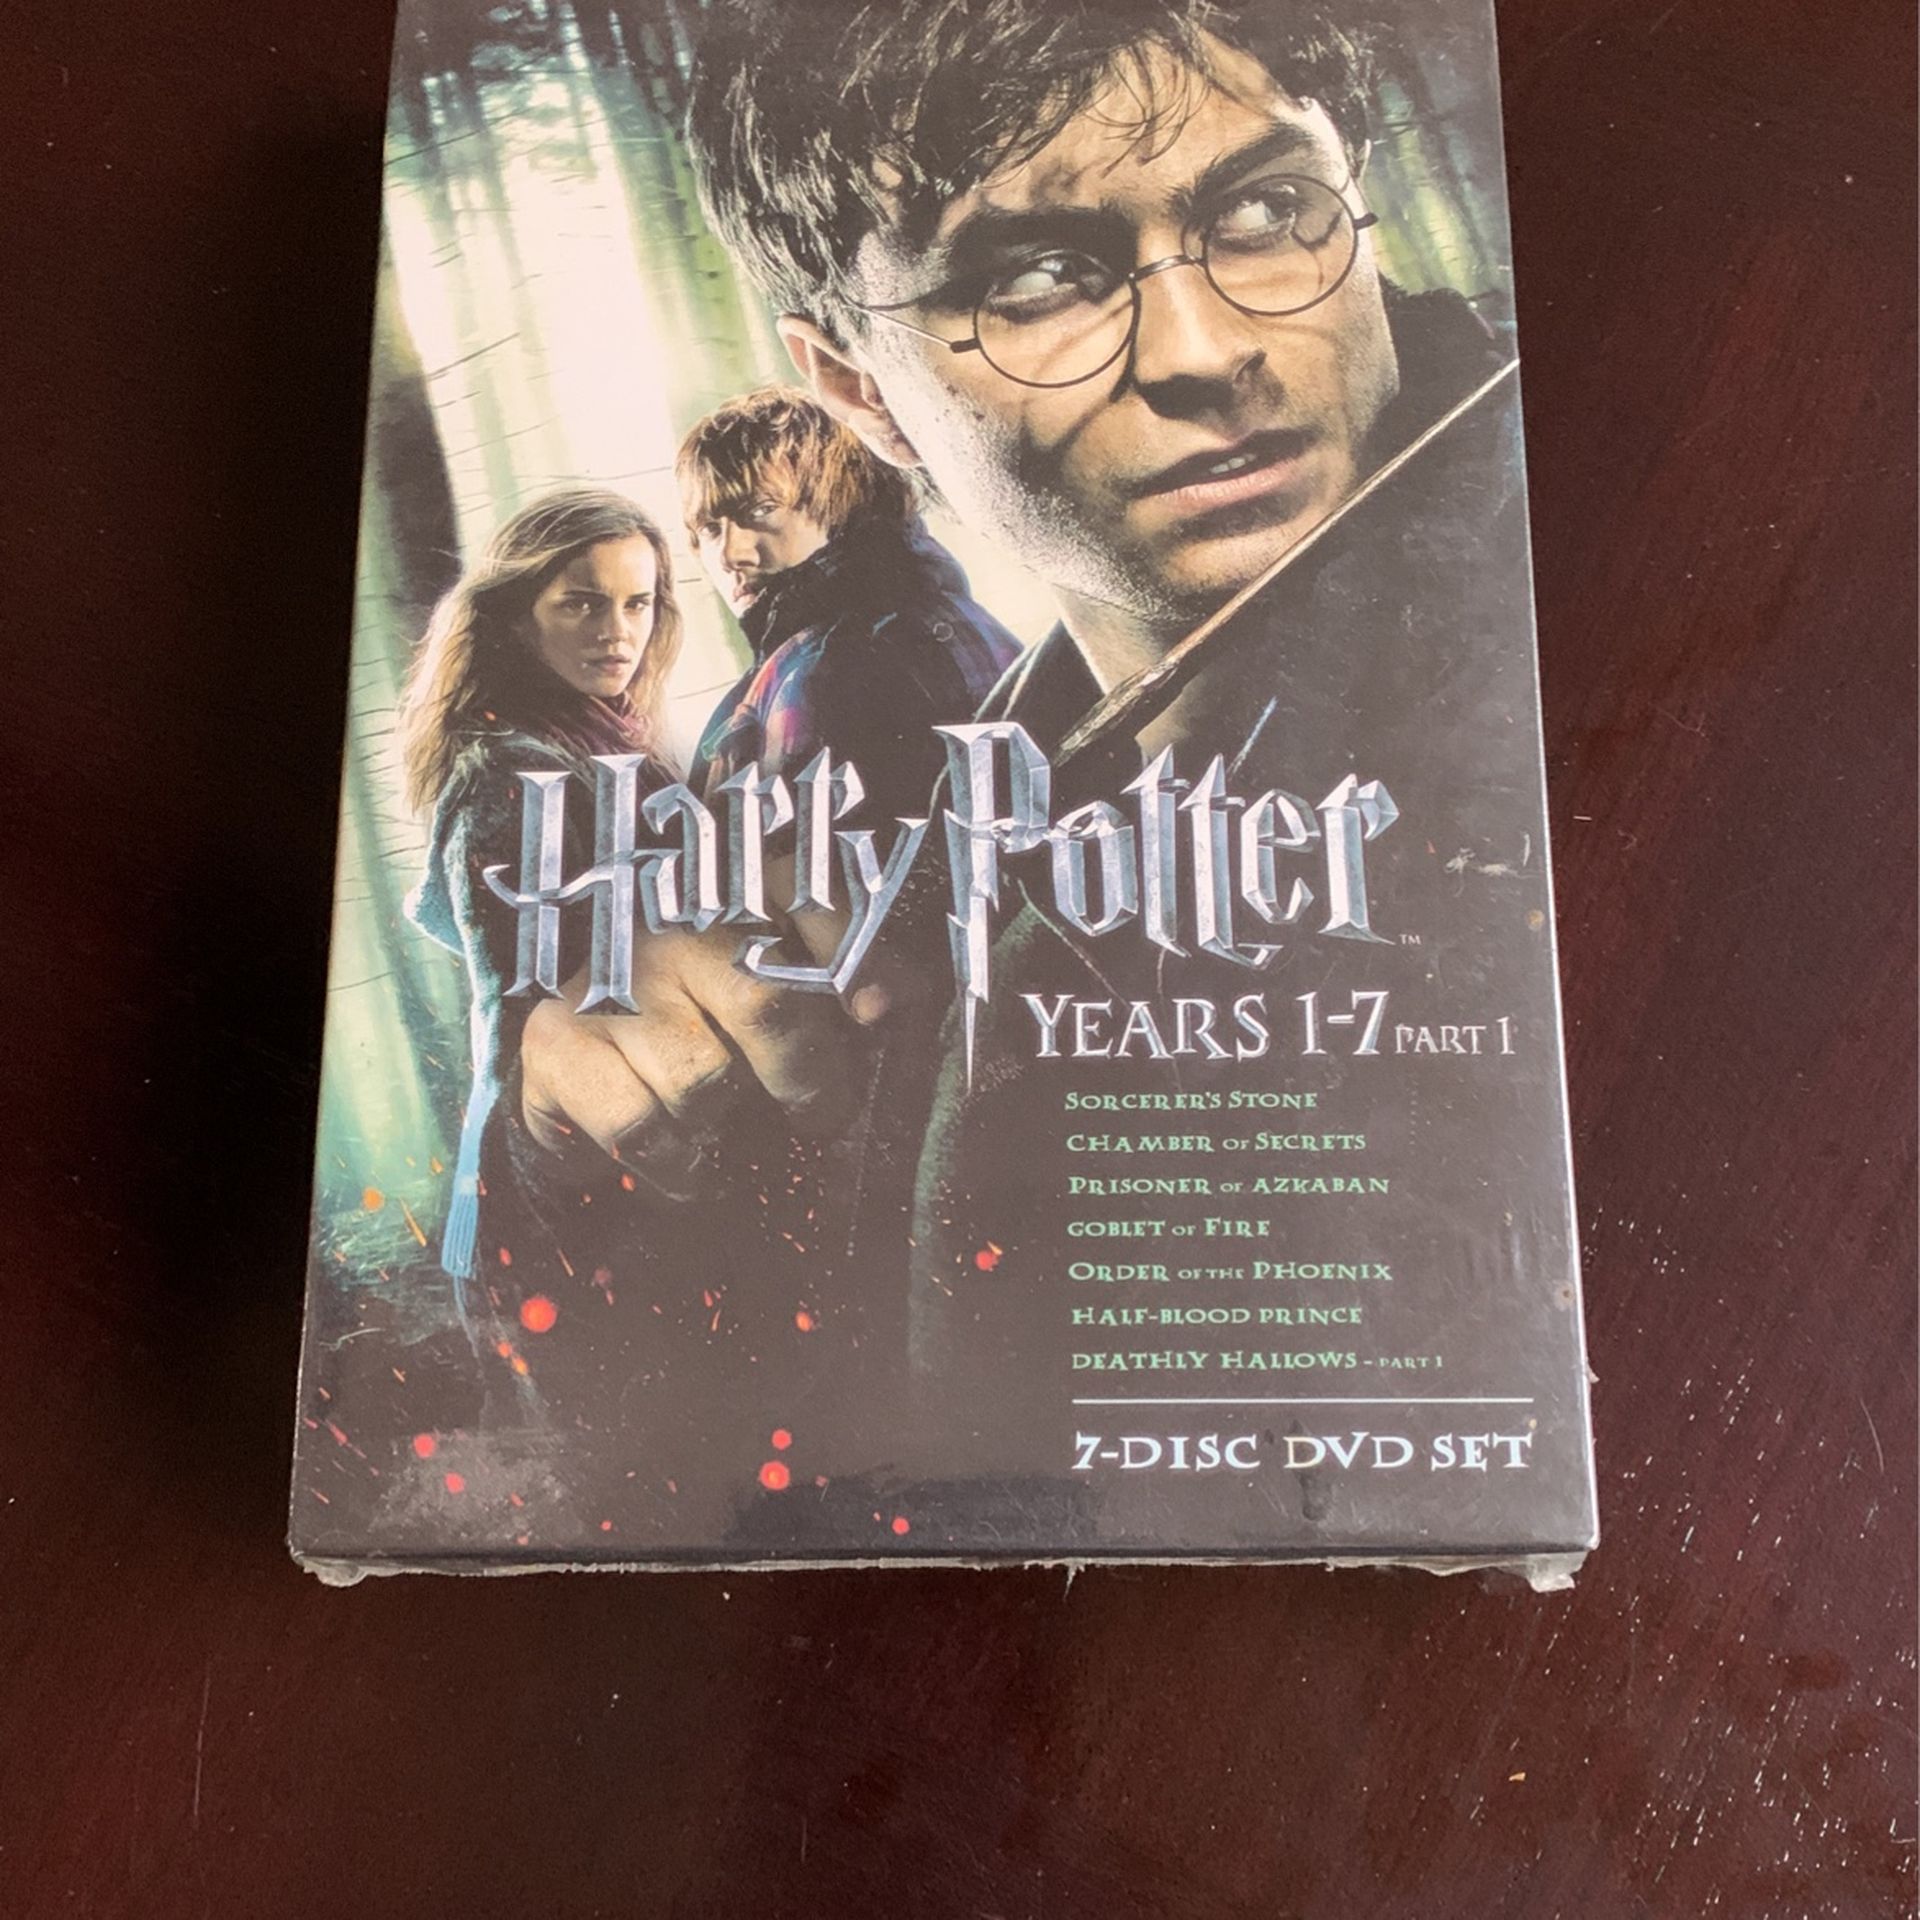 New Harry Potter Years 1-7 DVD Set